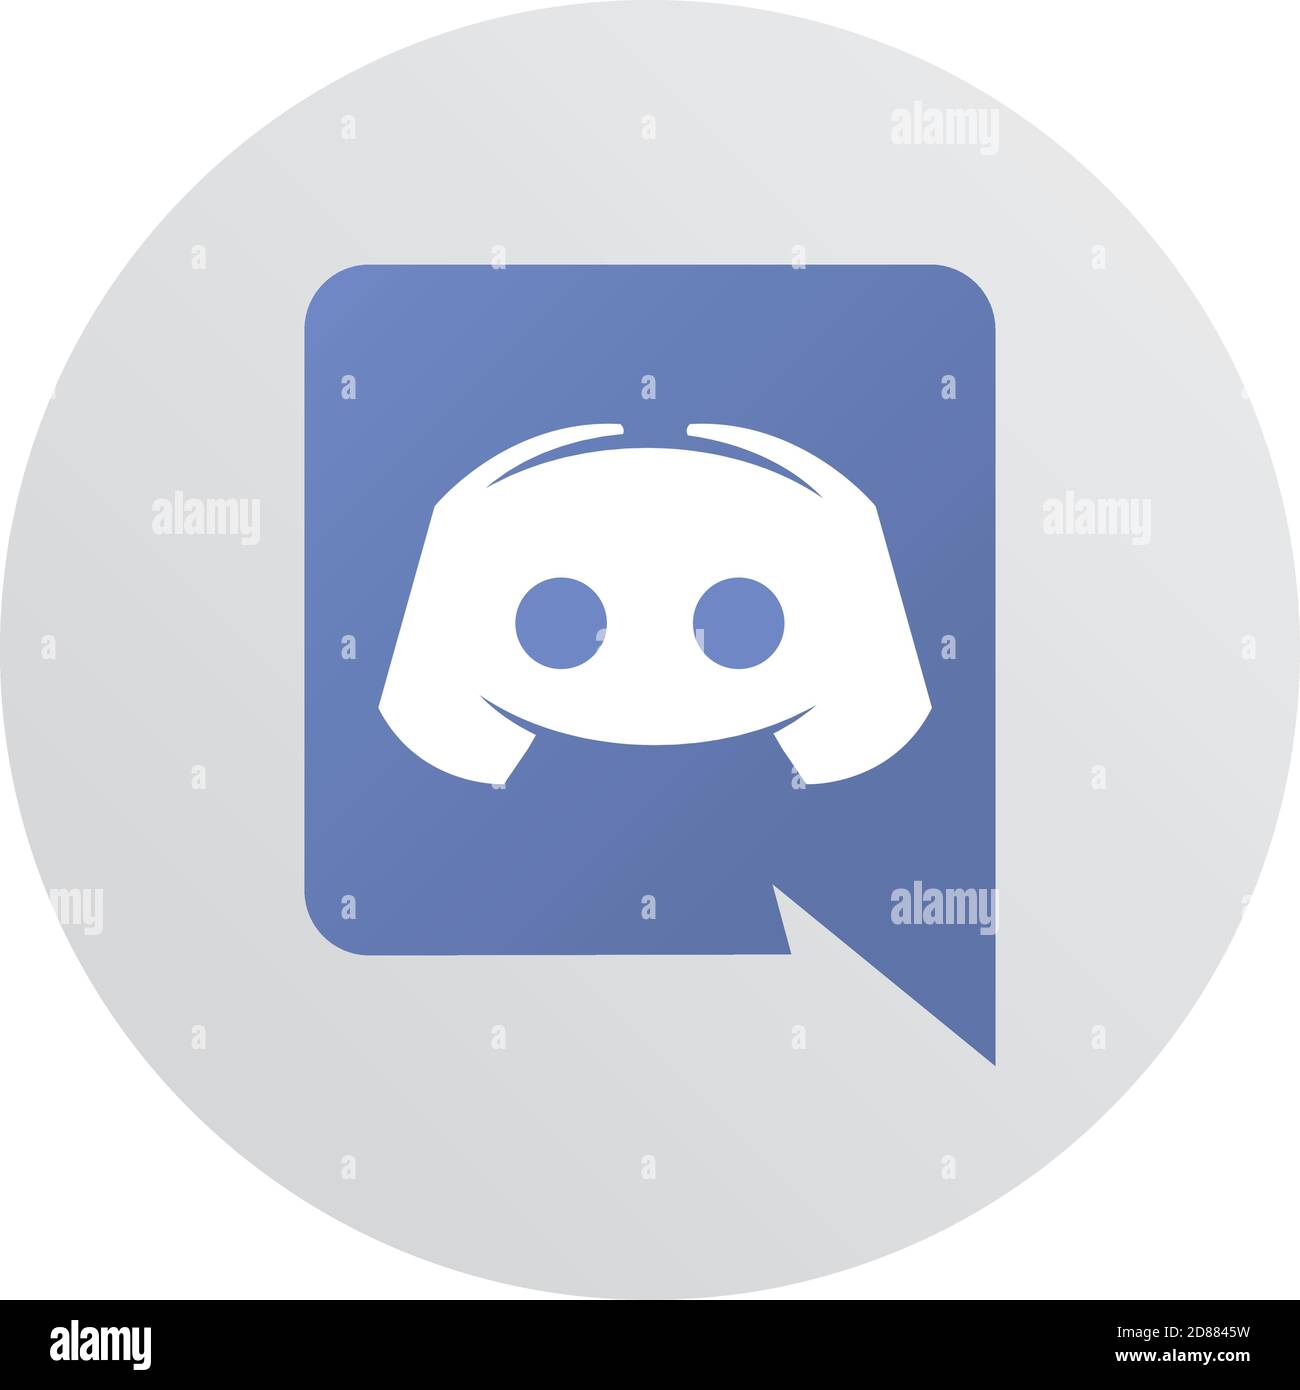 Discord clean chat How to